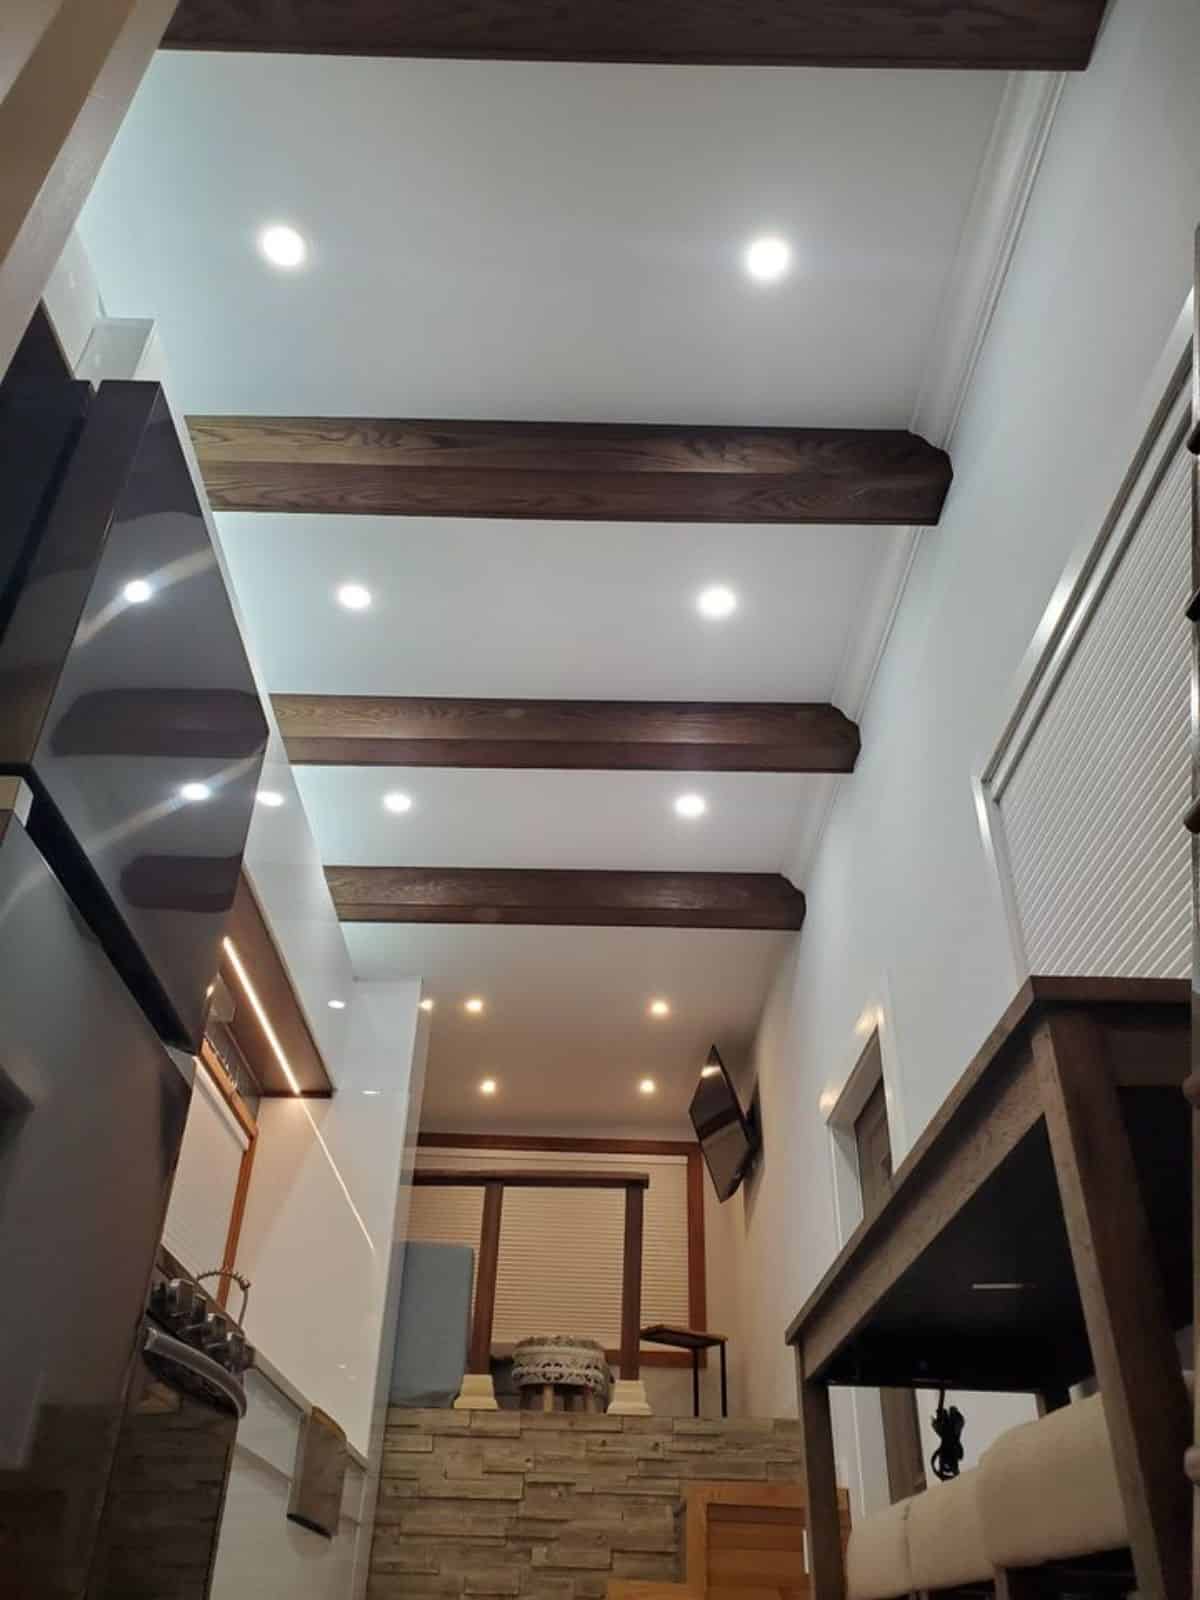 LED lights installed all over the house